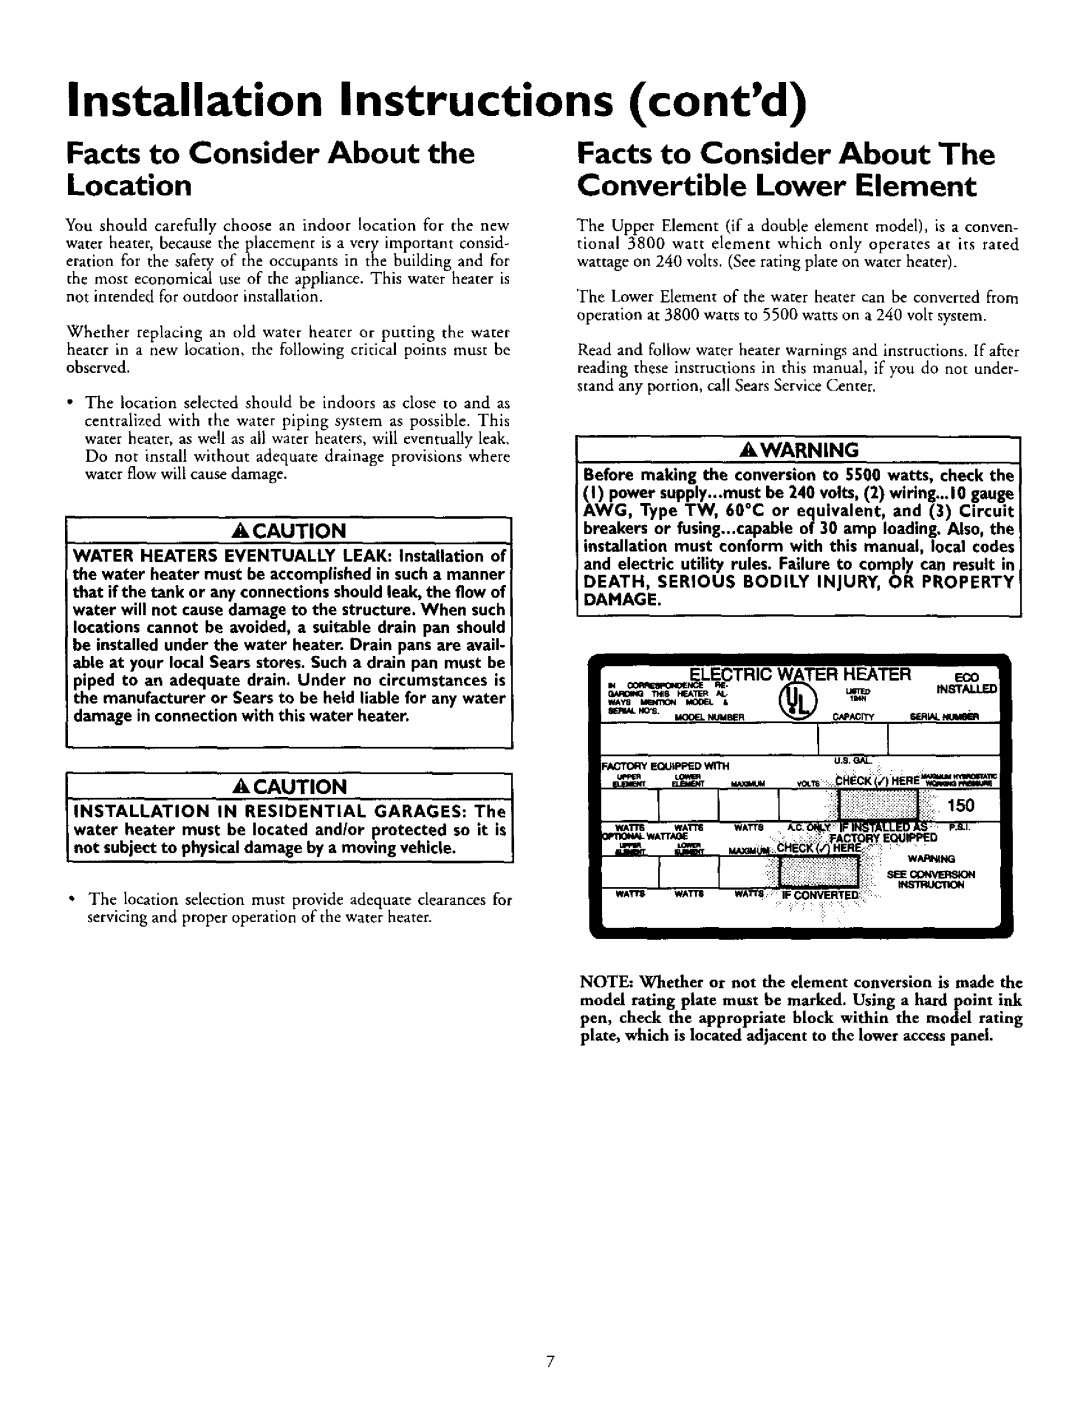 Kenmore 153.327363 Installation Instructions contd, Facts to Consider About the, About The, Location, Convertible Lower 